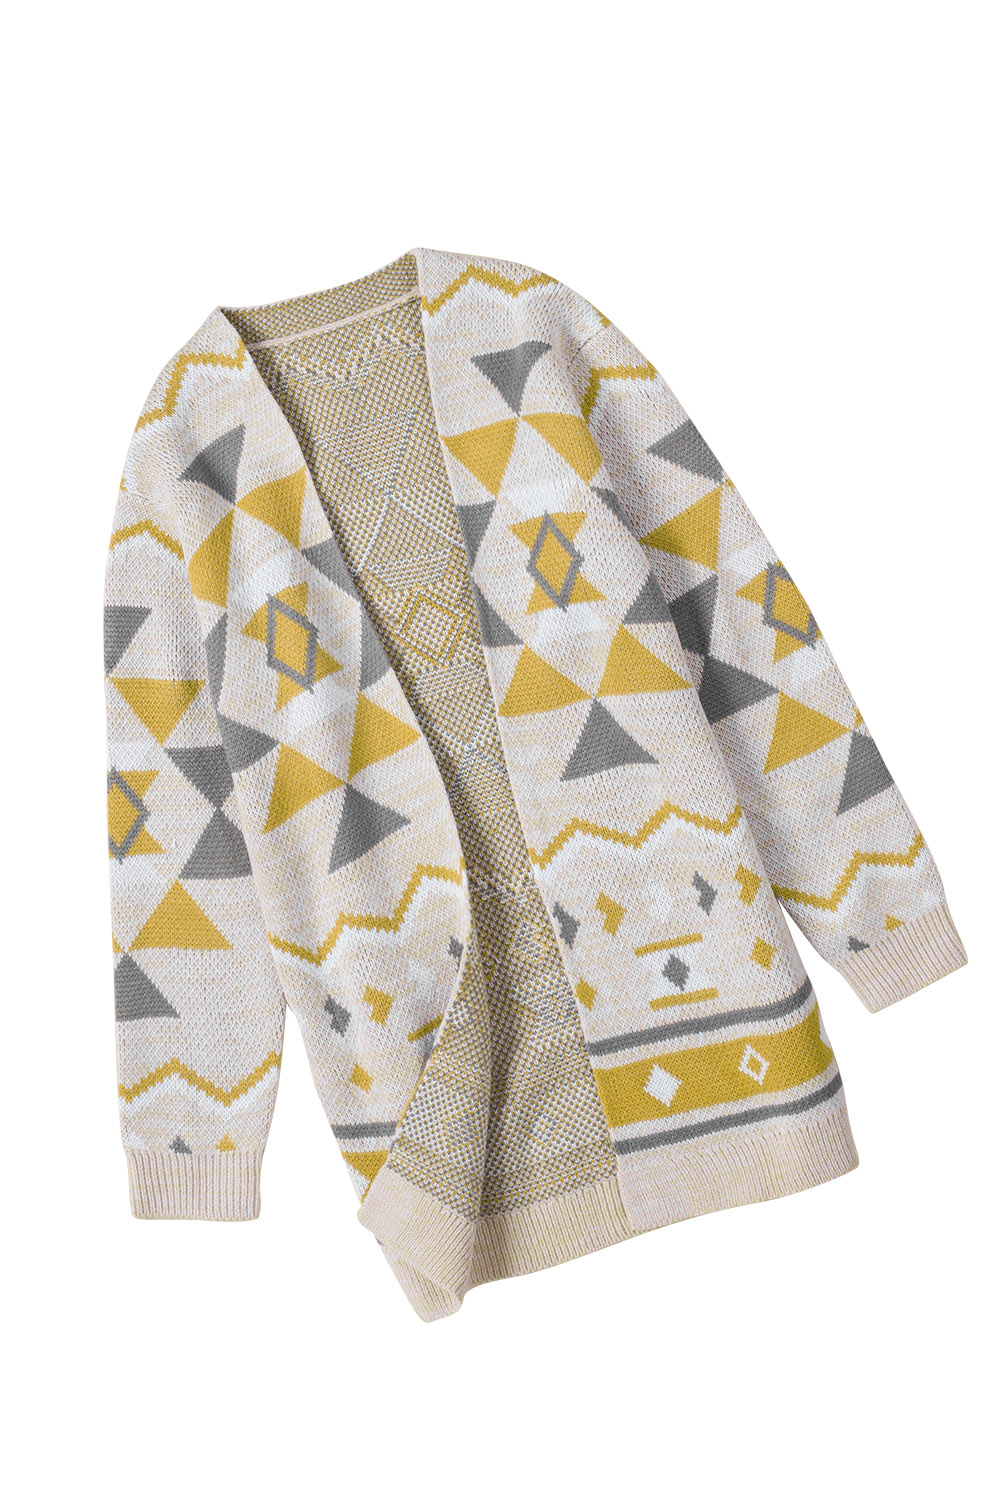 Geometric Print Open Front Knitted Cardigan - Passion of Essence Boutique